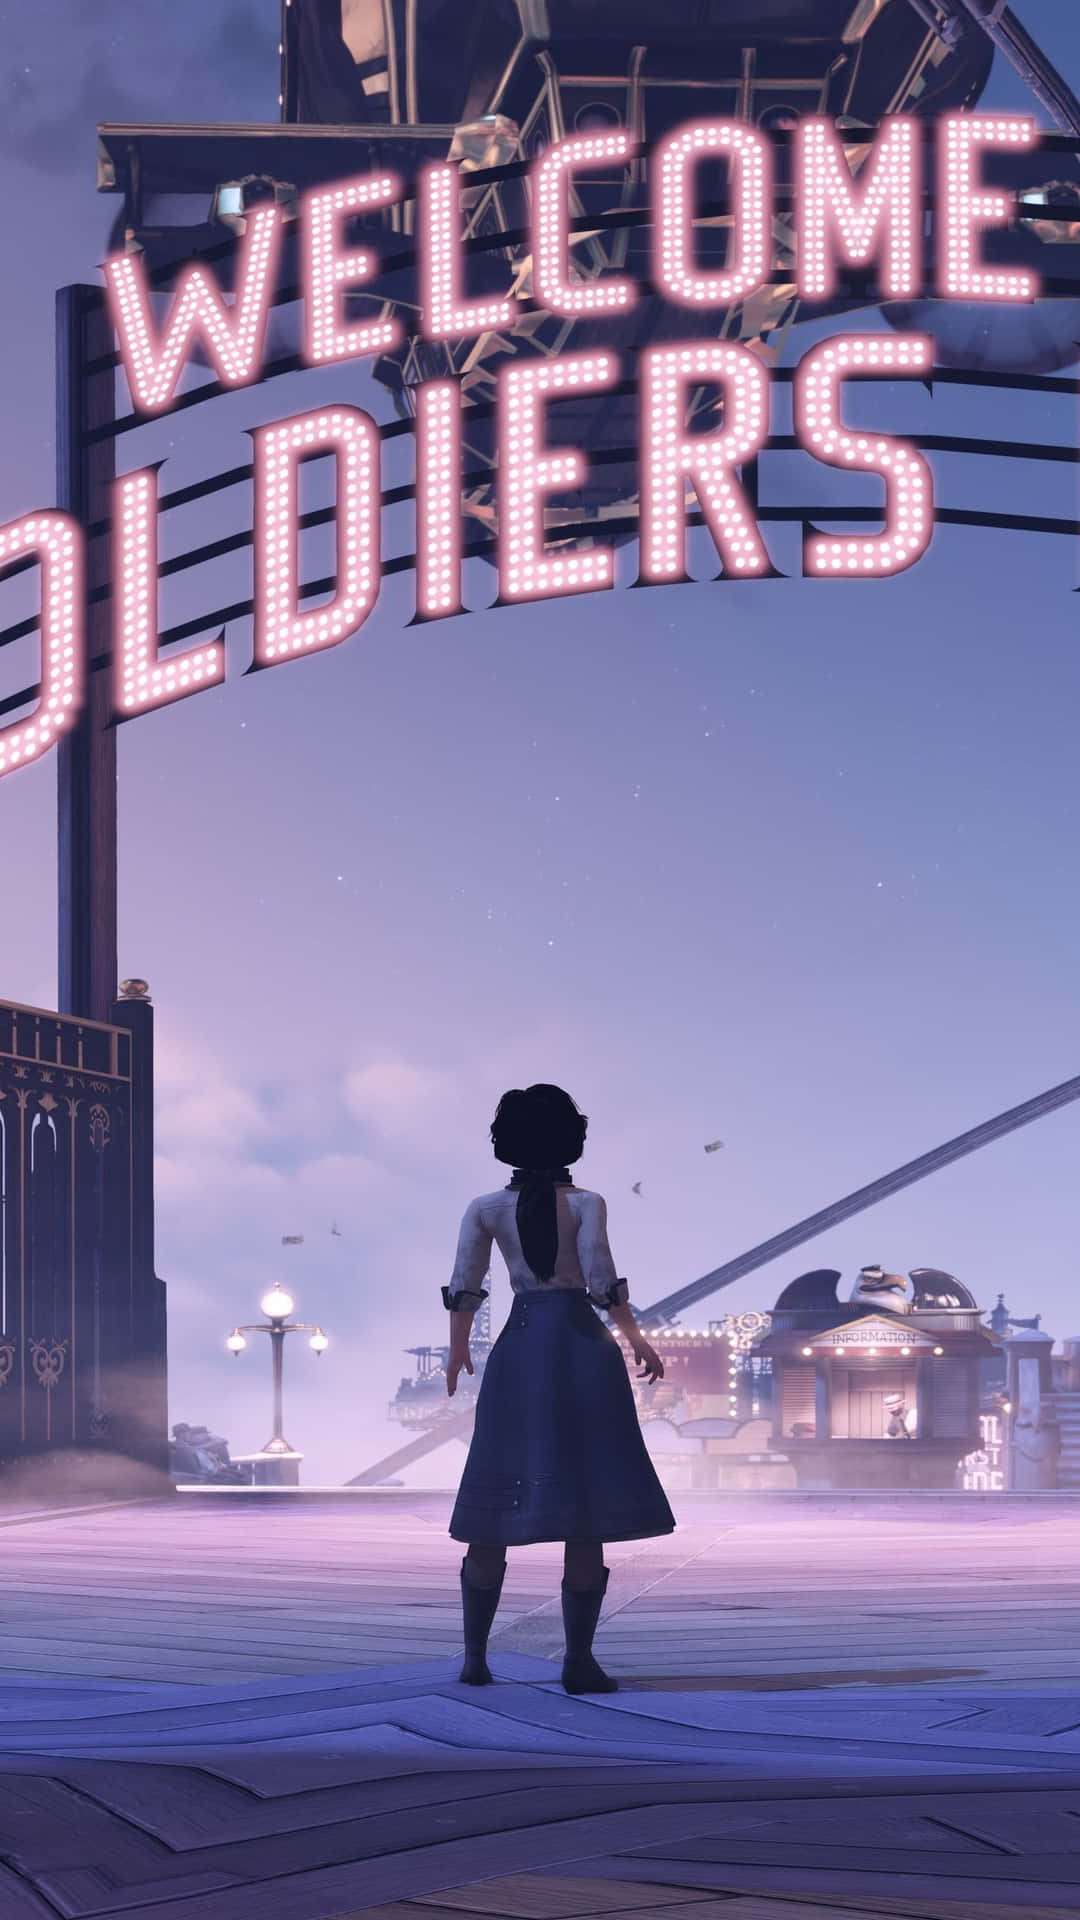 Android Bioshock Infinite Background Elizabeth Welcome Soldiers Sign